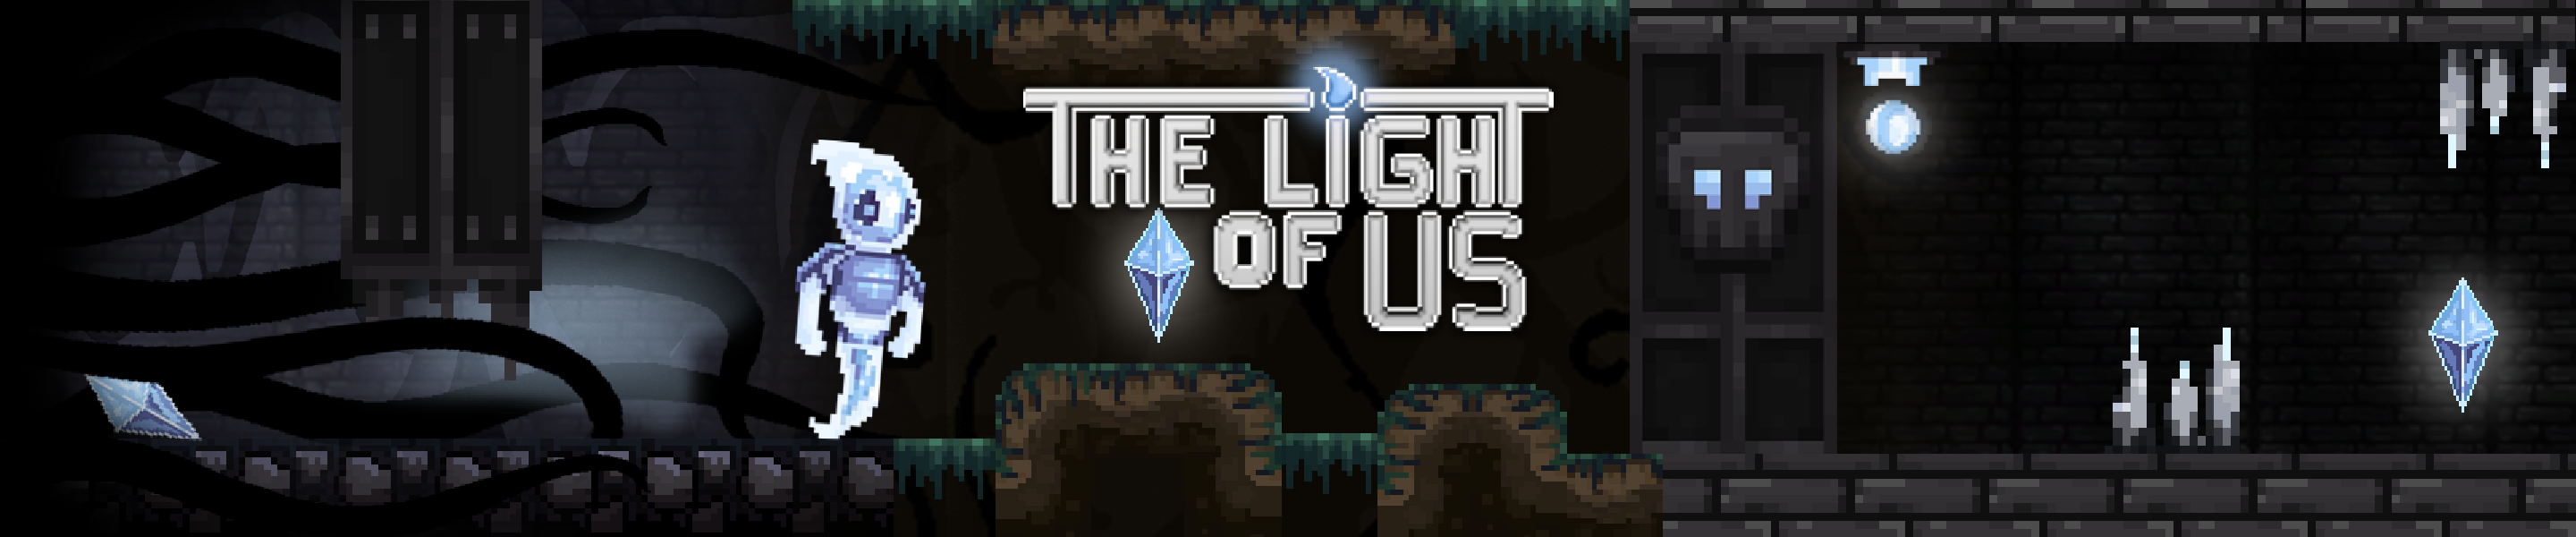 The Light of Us